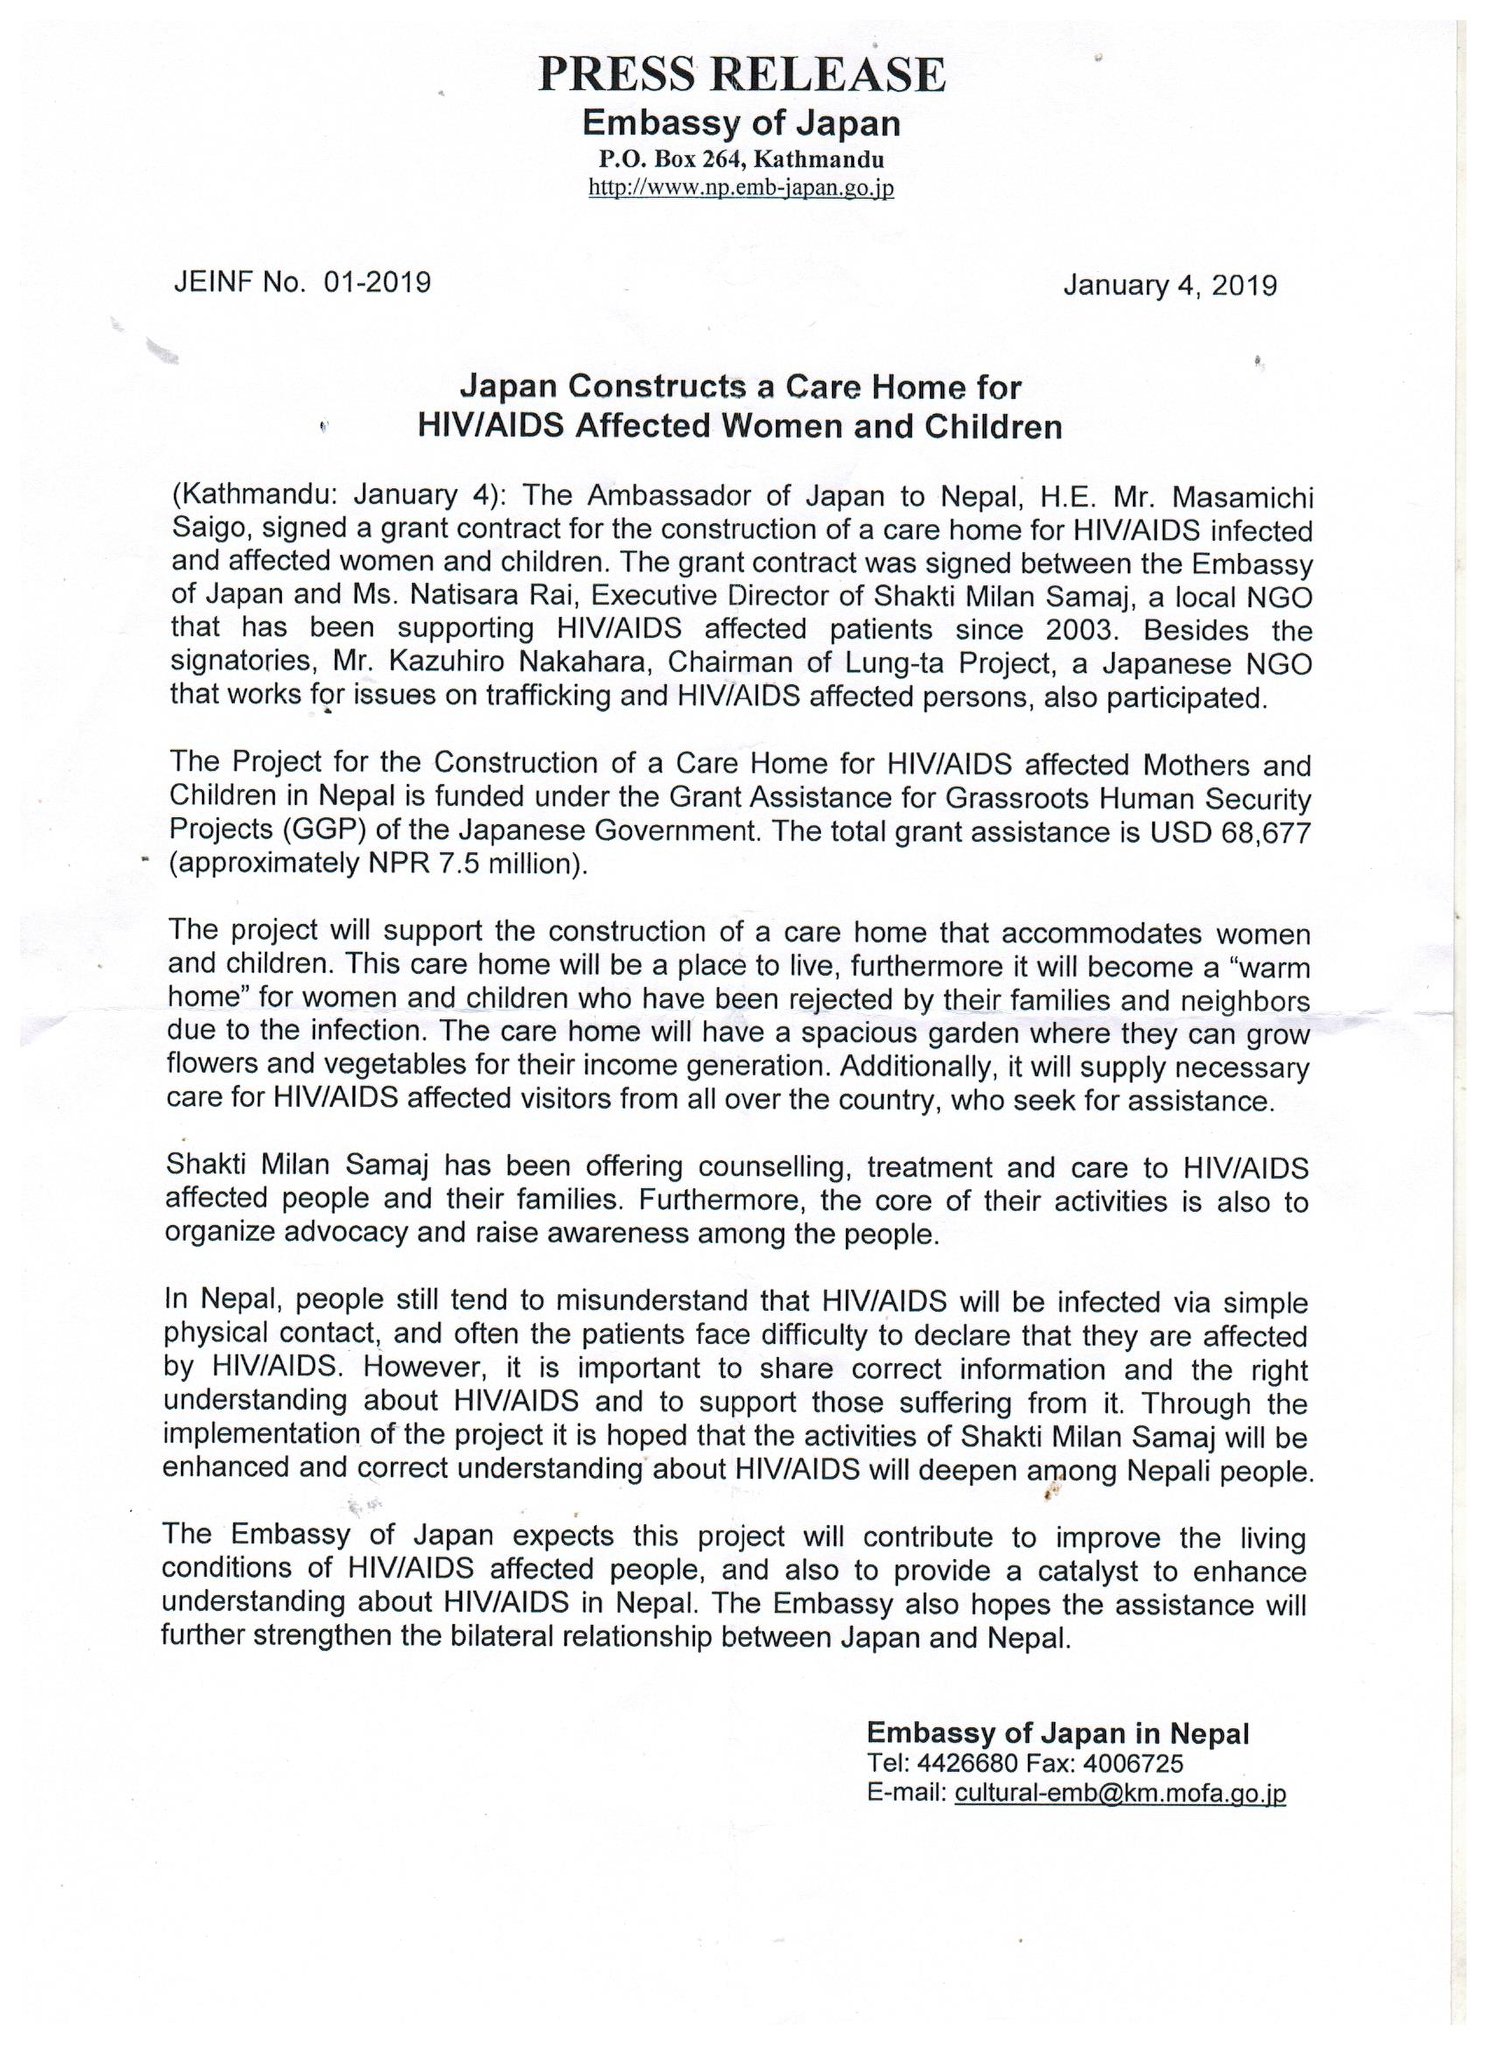 Press Release of Japanese Embassy about Construction of Shelter Homr